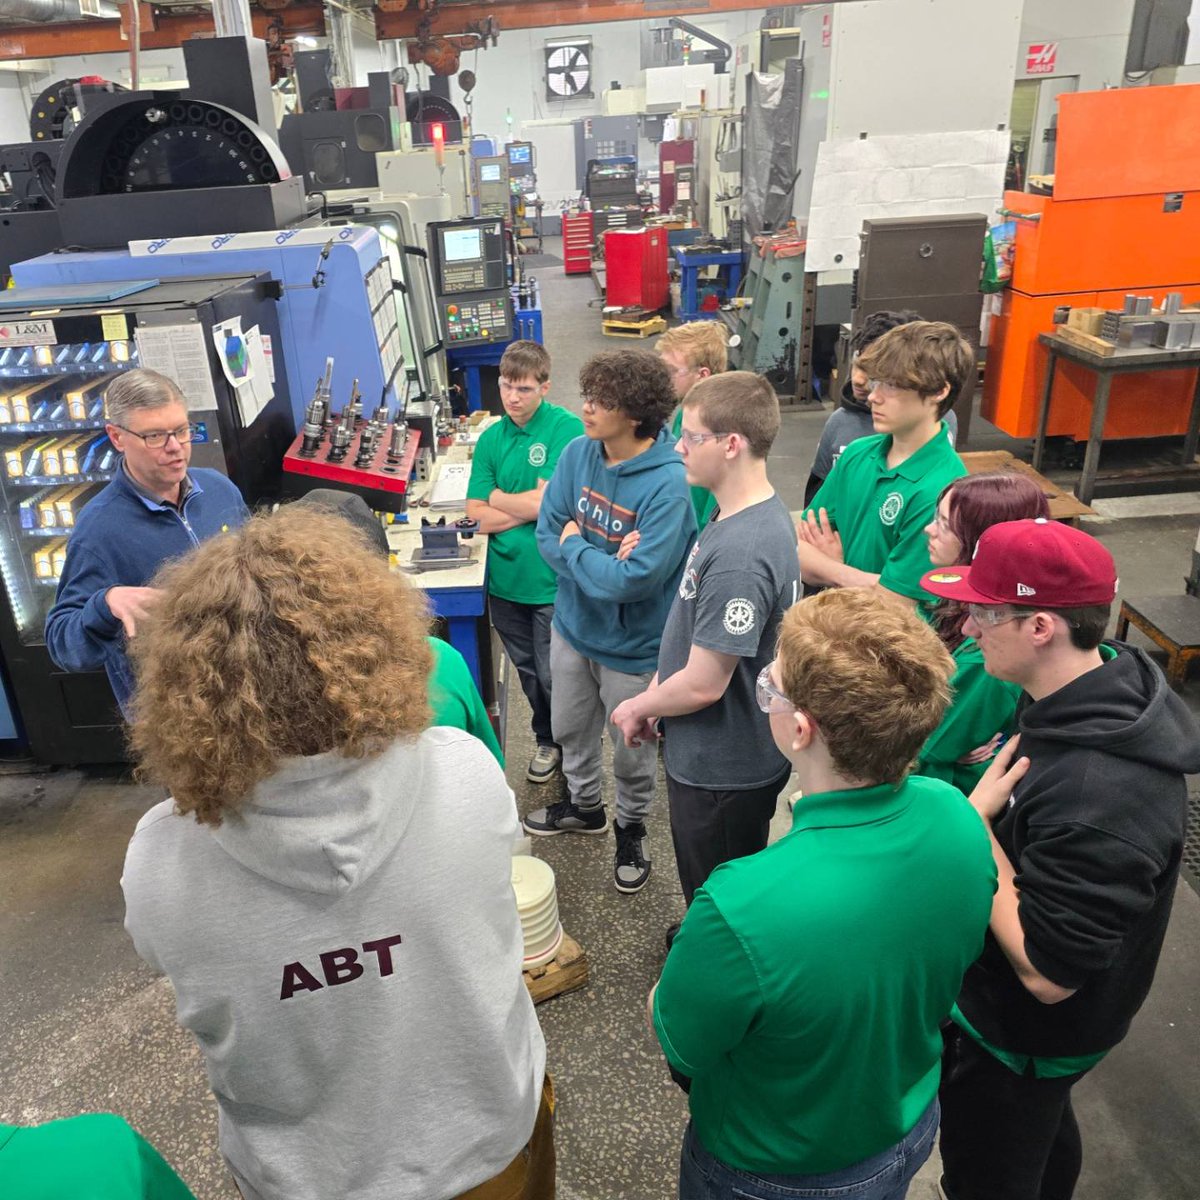 Thank you Colonial Machine and Copen Machine for hosting career visits to your businesses for the Computer Aided Design and Engineering Technologies students! @KentSchools @SMFHScounseling @THSCounselors @CFHS_Counseling @WoodridgeWHS @hudsonohschools @sixdistrictCTE @OhioACTE